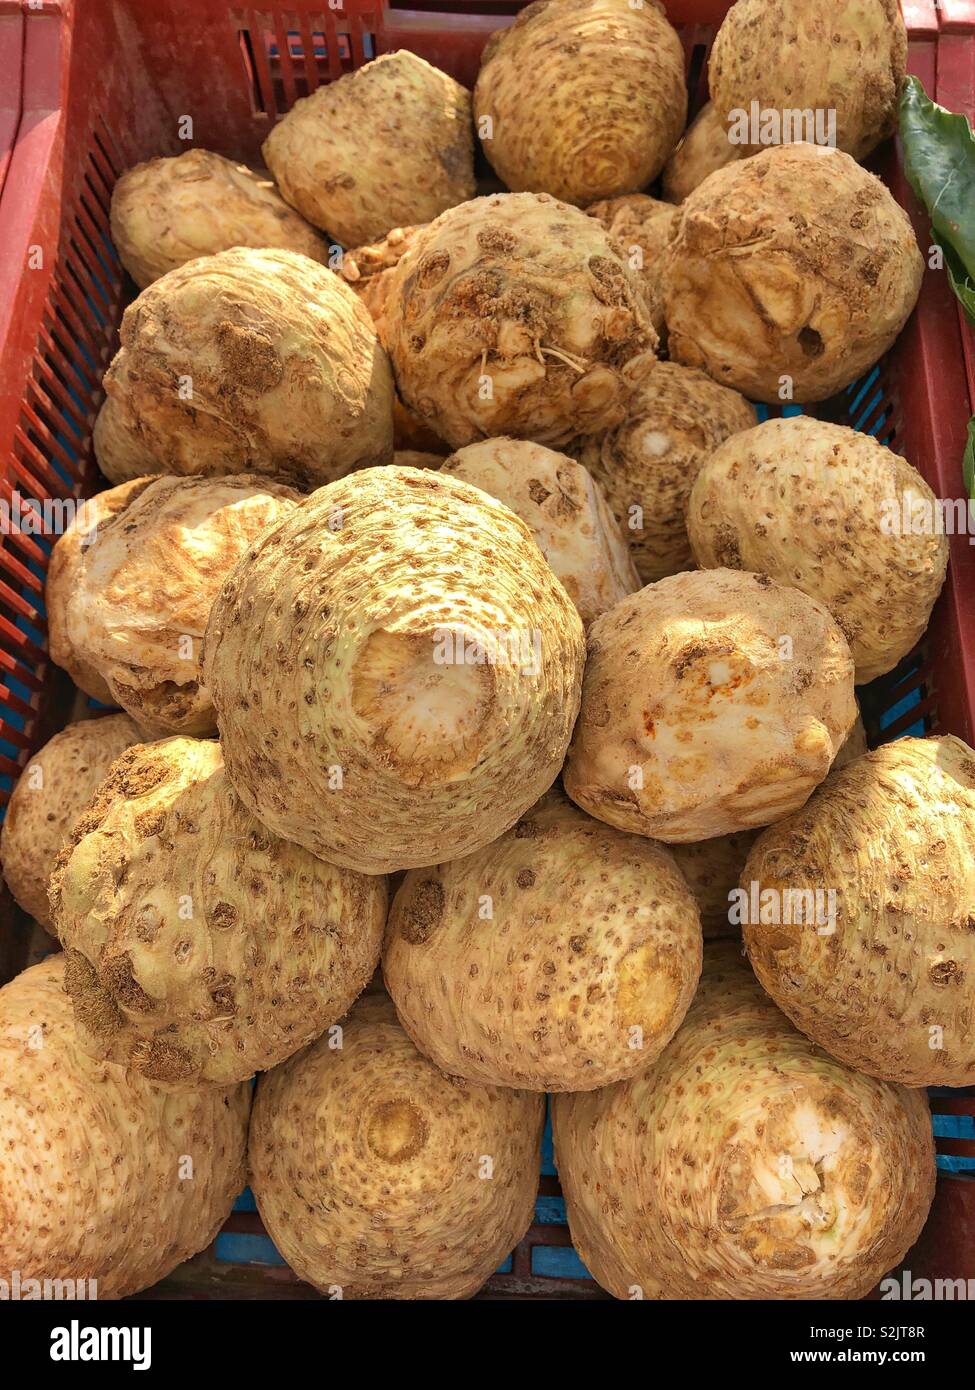 Celeriac for sale in a french market Stock Photo